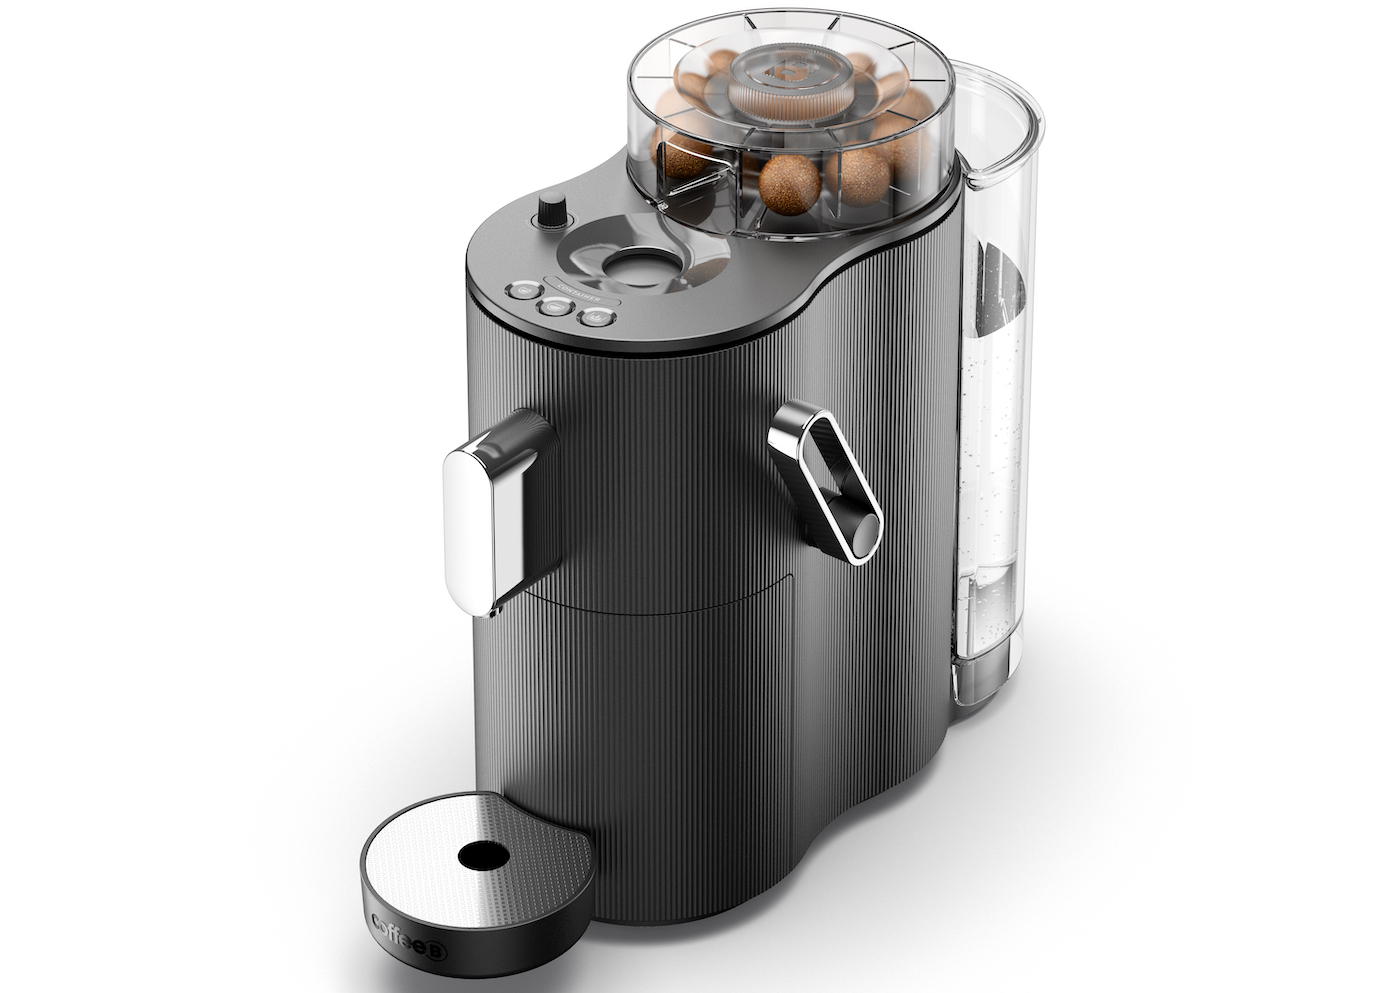 This coffee machine wants to make capsules a thing of the past